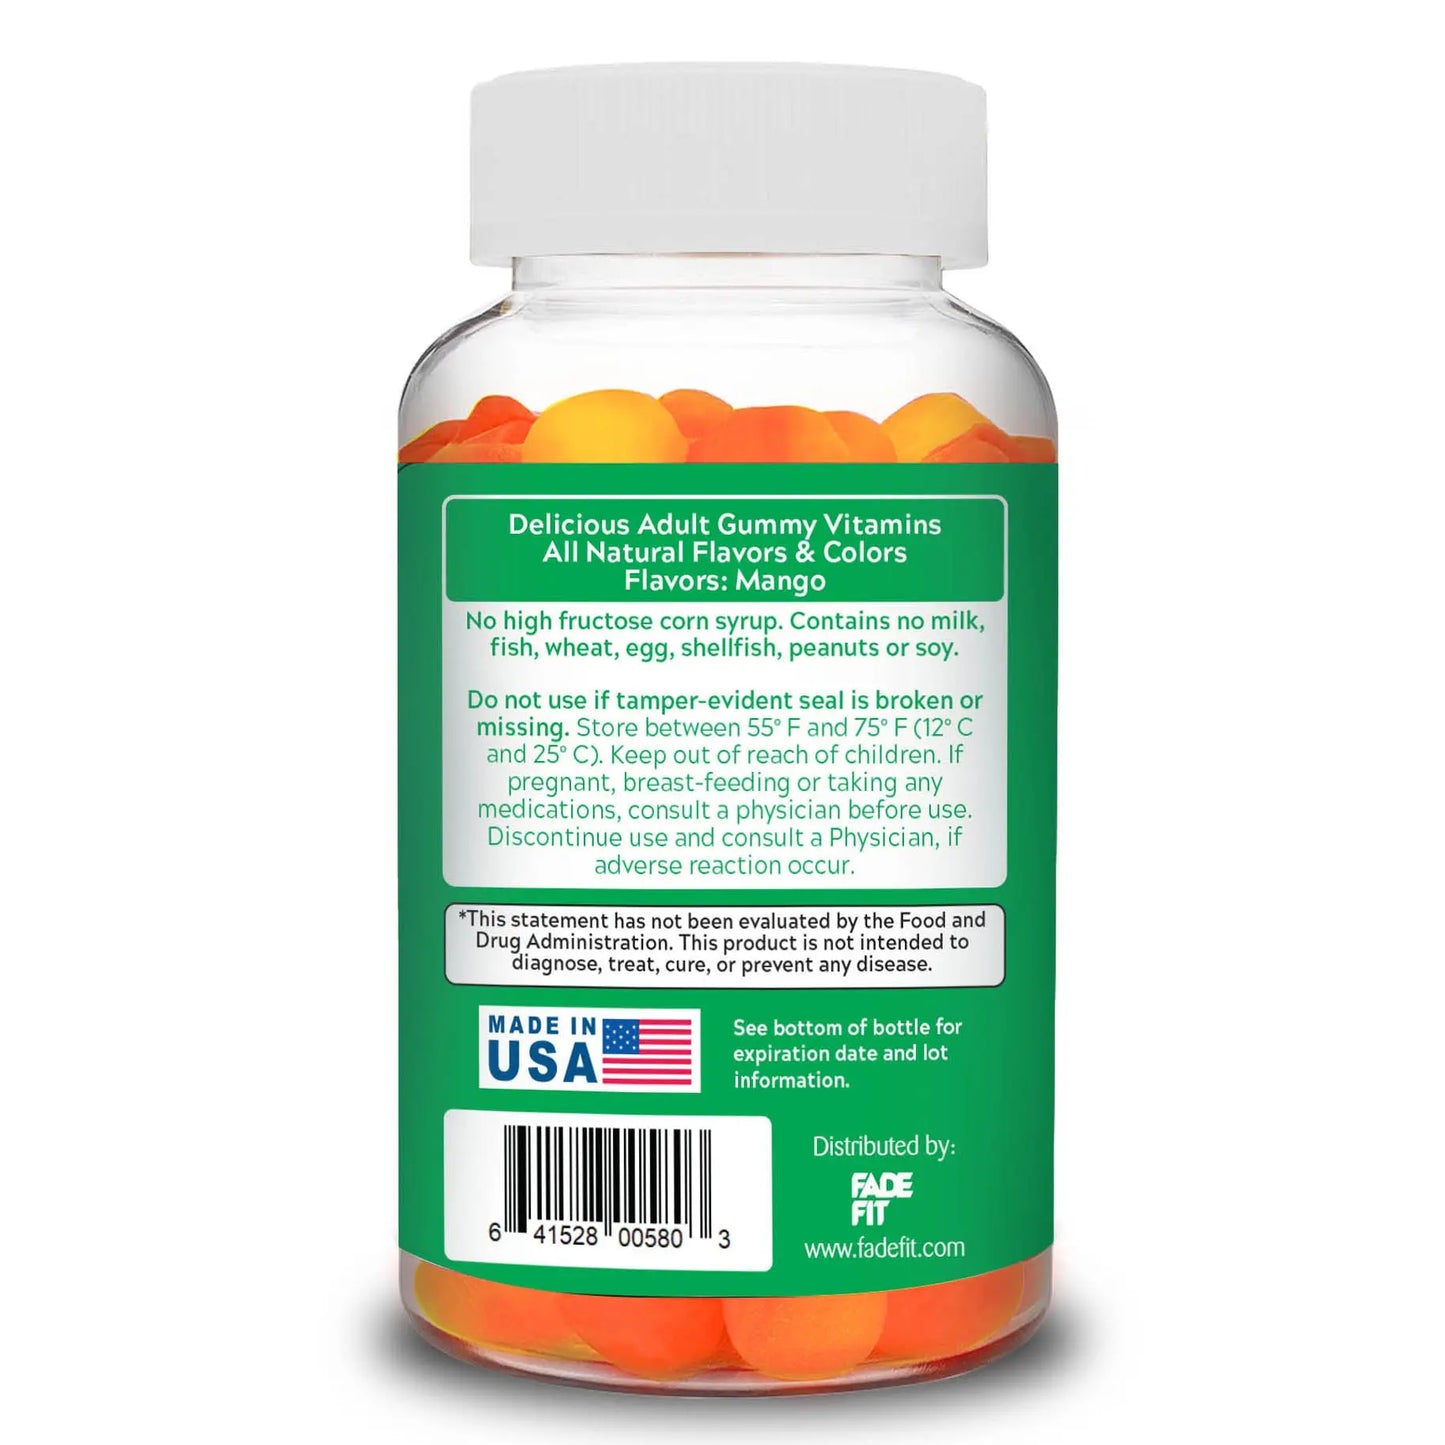 Fade Fit Turmeric Ginger Gummies 193G Fade Fit